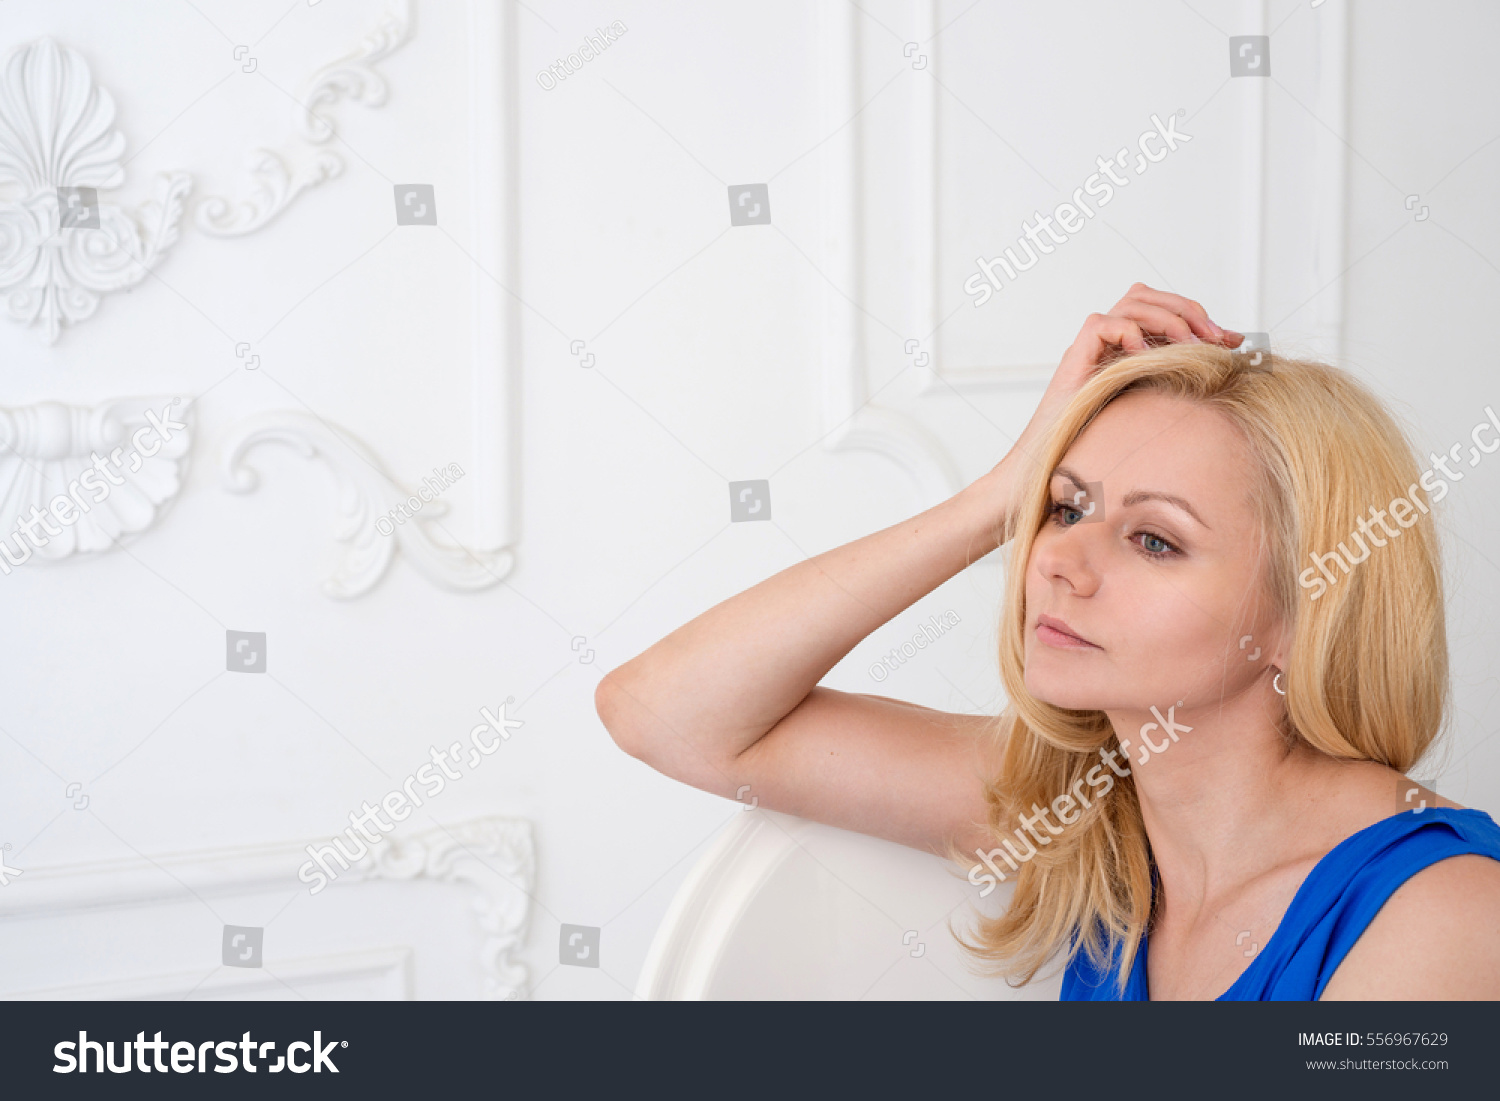 Portrait of a beautiful blonde woman on a light background #556967629